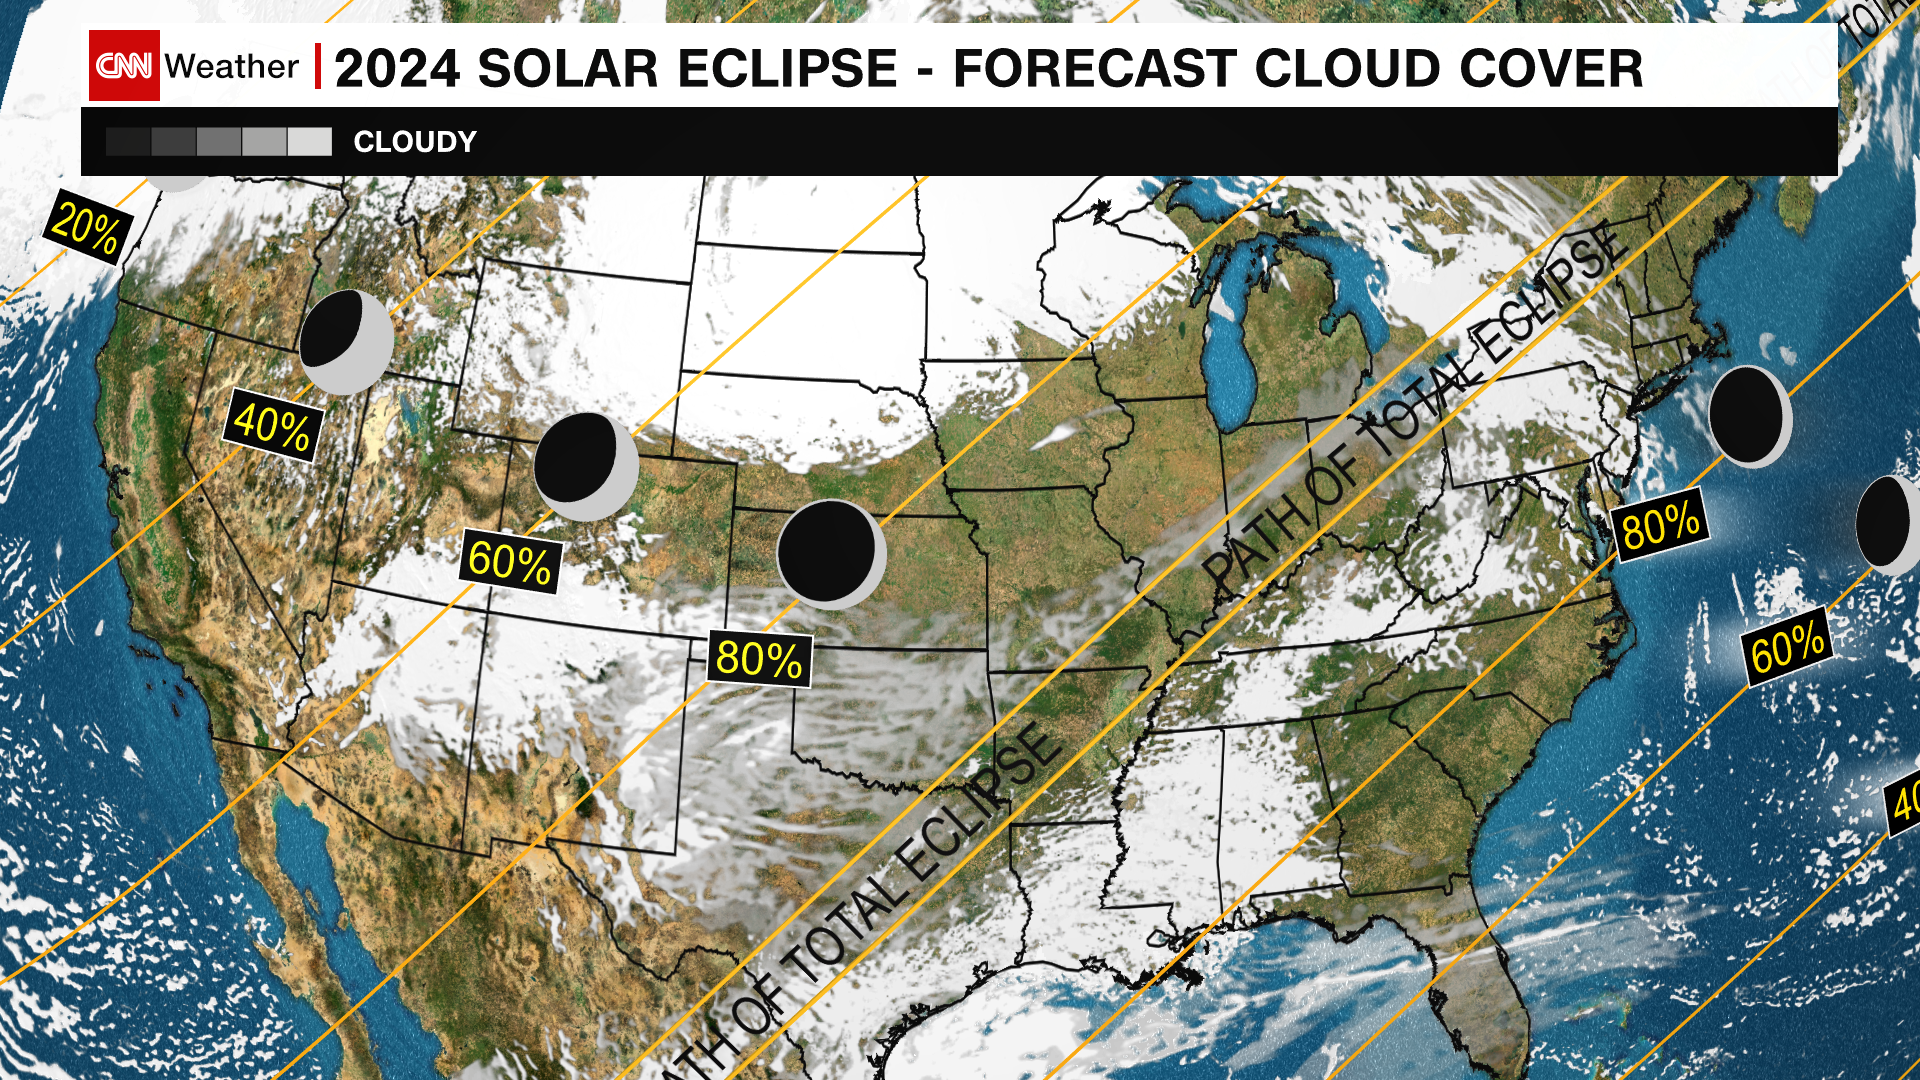 One forecast model's depiction of cloud cover during the eclipse. Exact levels of cloudiness could change slightly at the time of the eclipse. 